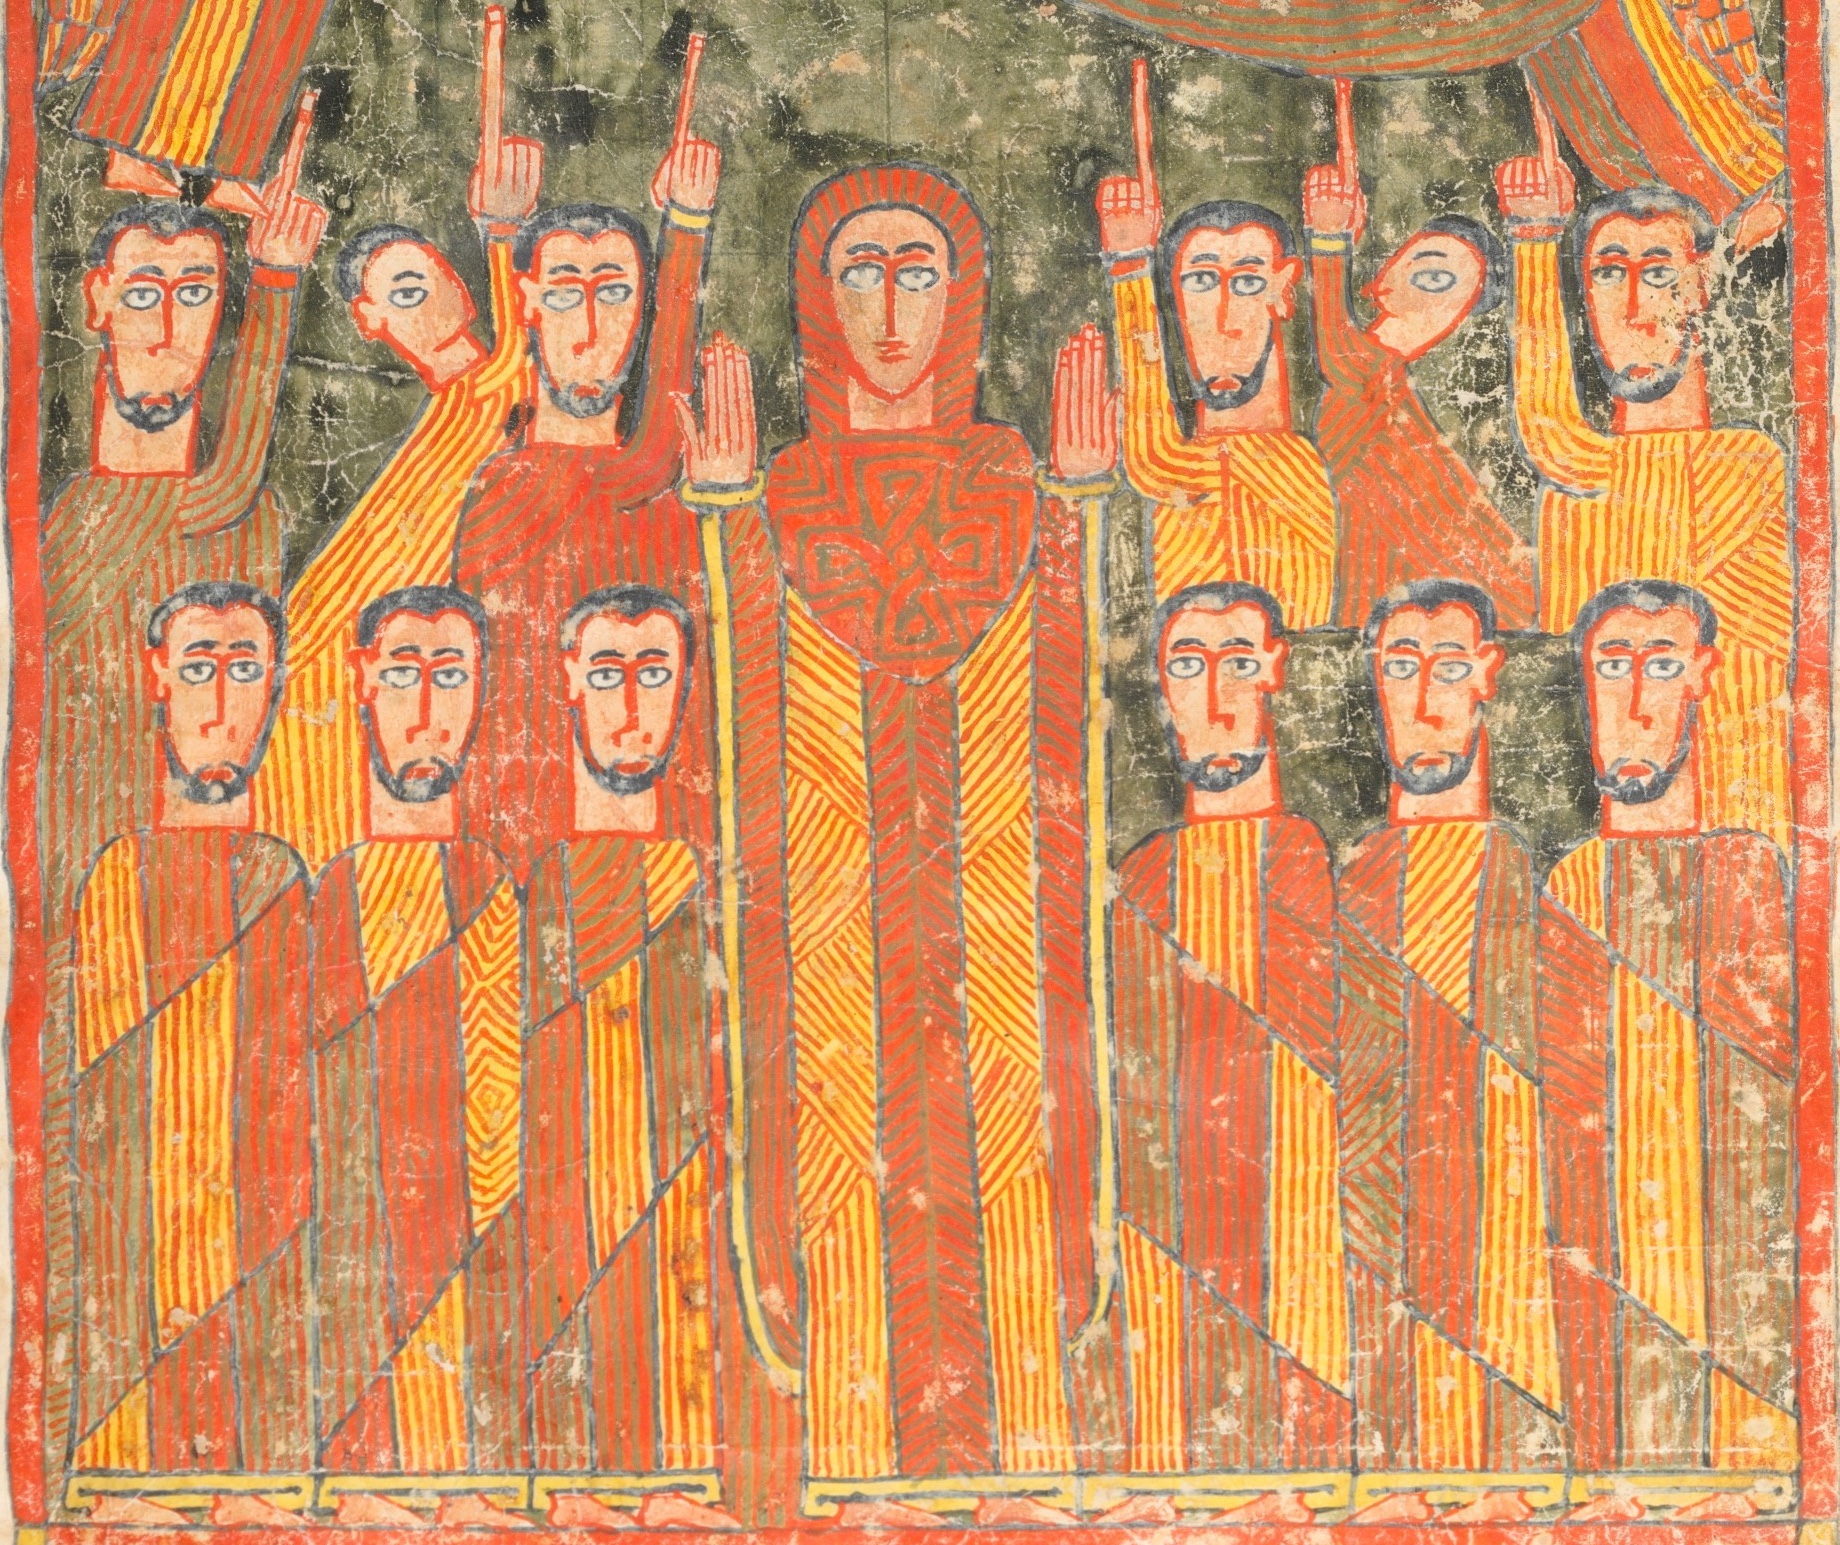 Mary and the apostles (detail), Illuminated Gospel, Amhara peoples, Ethiopia, late 14th–early 15th century, parchment (vellum), wood (acacia), tempera and ink, 41.9 x 28.6 x 10.2 cm (The Metropolitan Museum of Art, New York)